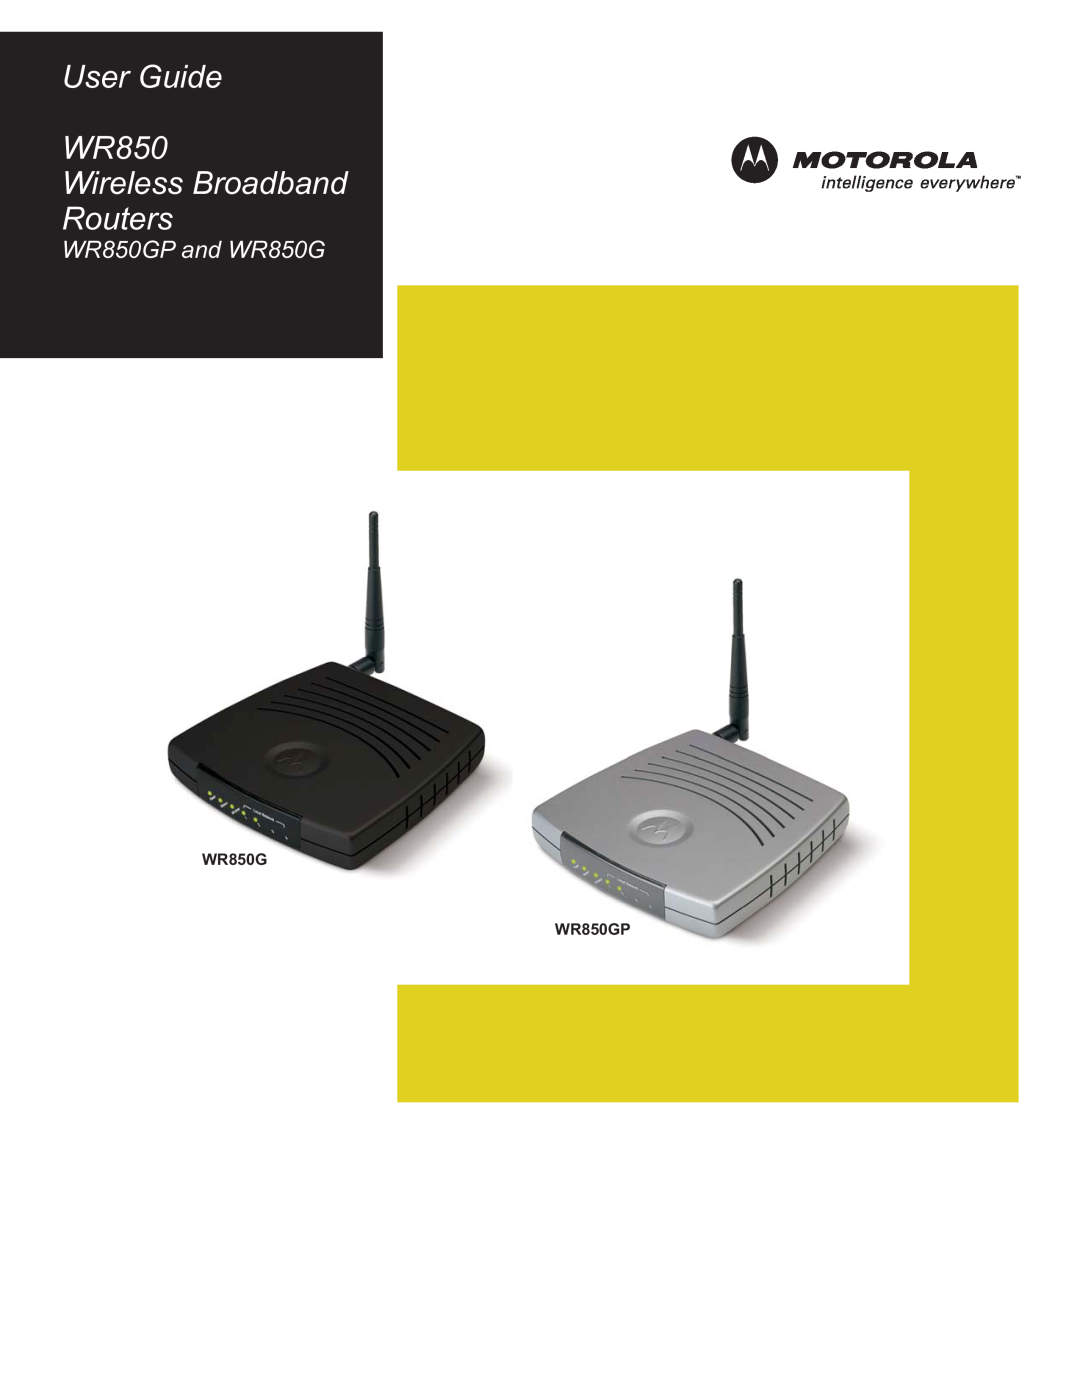 Motorola manual User Guide WR850 Wireless Broadband Routers, WR850GP and WR850G, WR850G WR850GP 